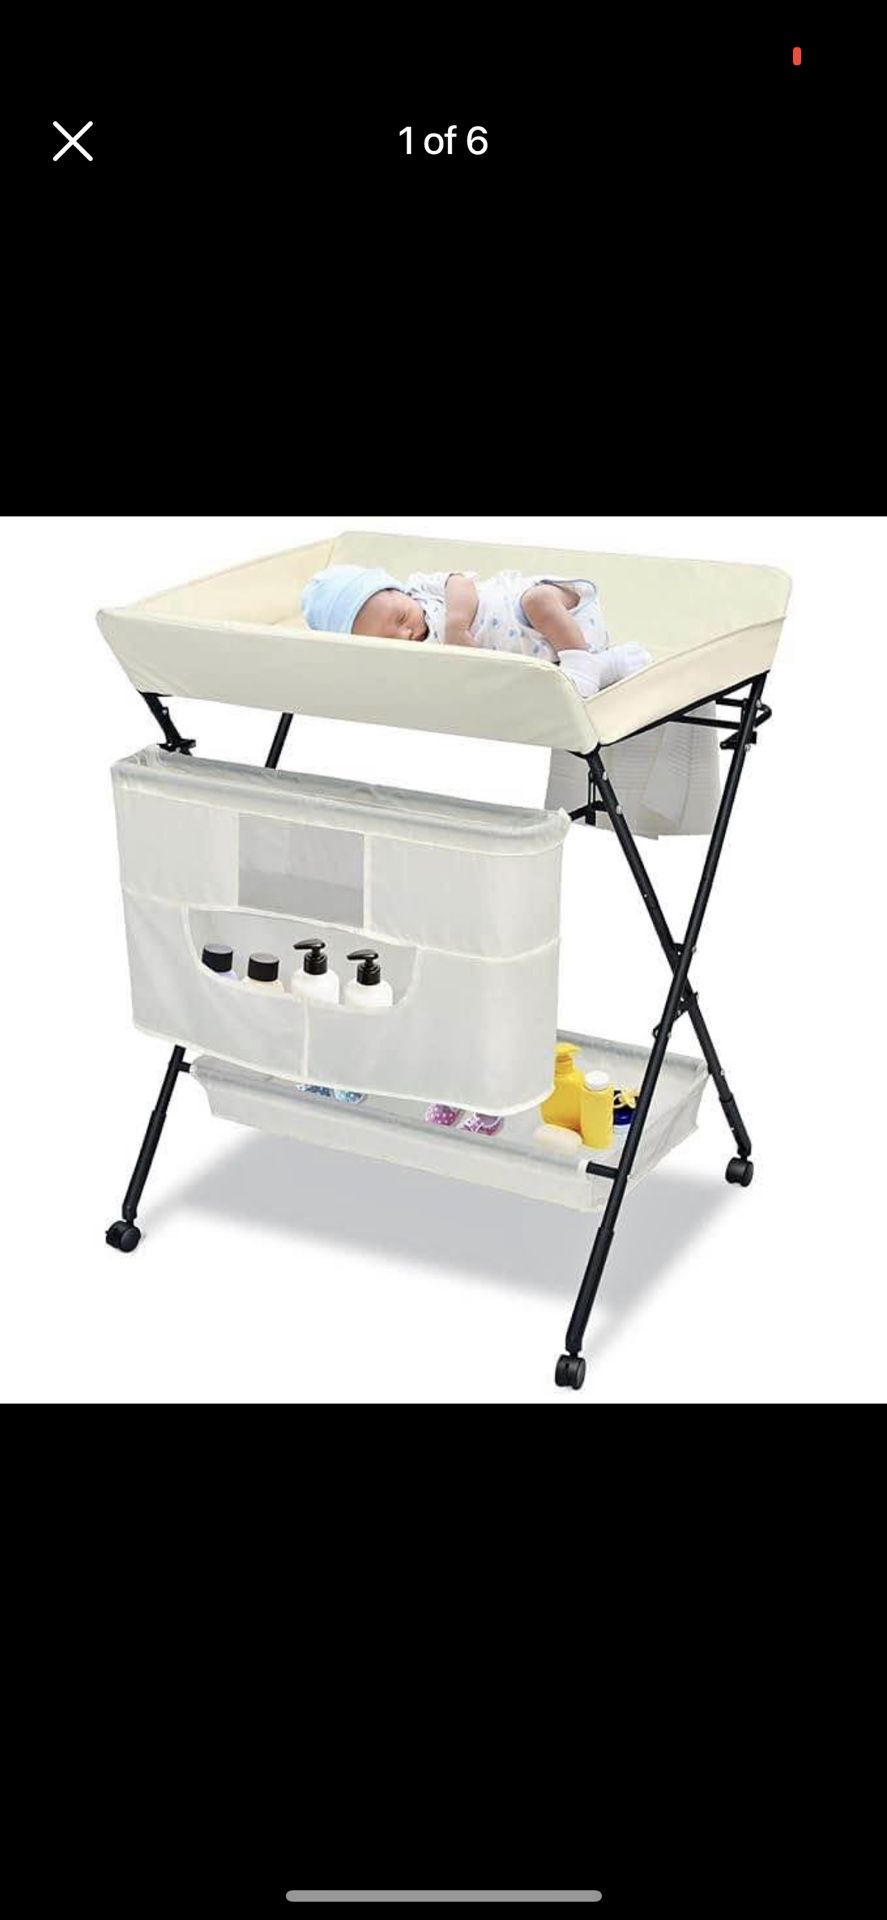 New in box Baby Changing Table with Wheels, Portable Adjustable Height Folding Diaper Station